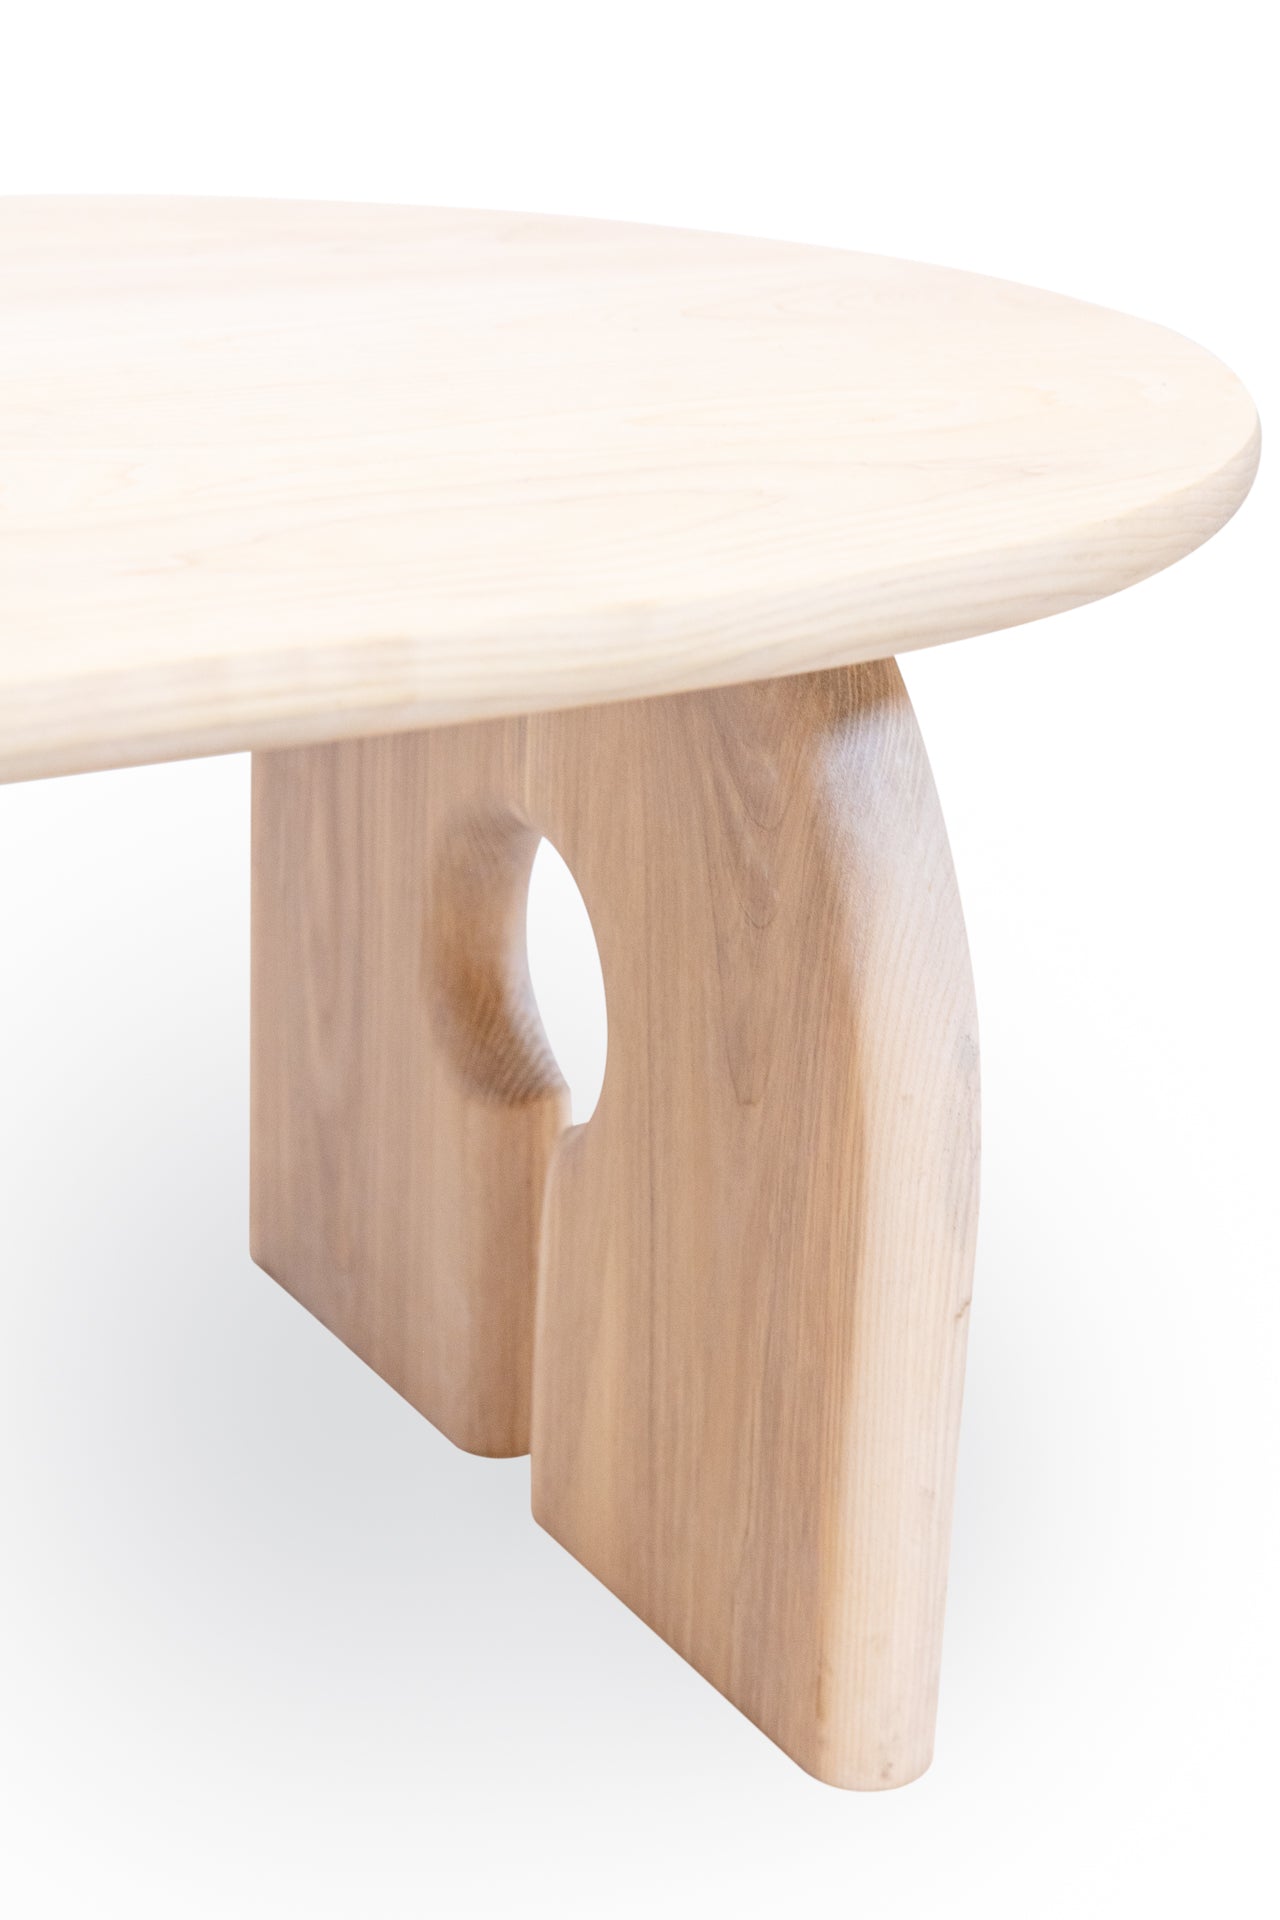 Wooden coffee table with a natural finish, featuring a fully curved edge and corners. The table has two legs positioned on opposite sides, each shaped like a half-circle connected to the table from the top of the circle.